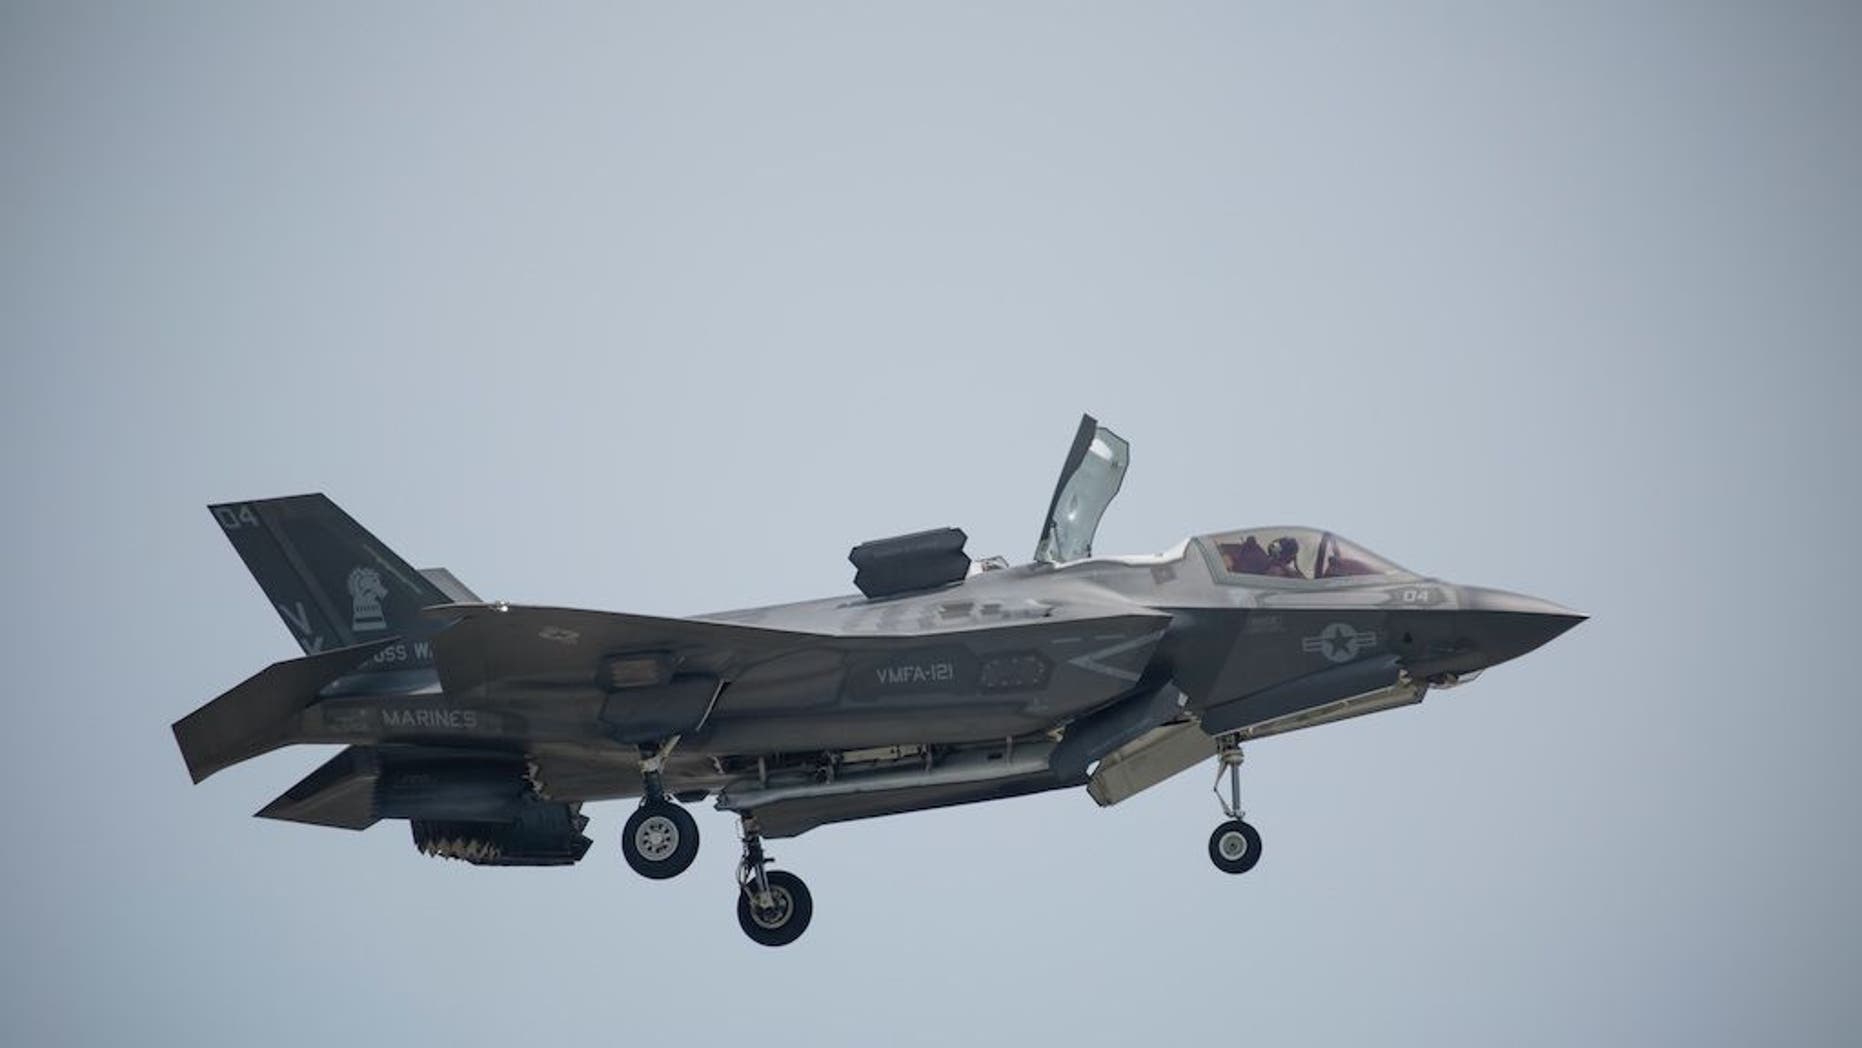 An F-35 fighter jet is seen in this undated photo. The Pentagon announced it "suspended" deliveries of F-35 fighter jet parts and manuals to Turkey over the Middle Eastern country's decision to purchase a Russian air defense system over Washington's objection.